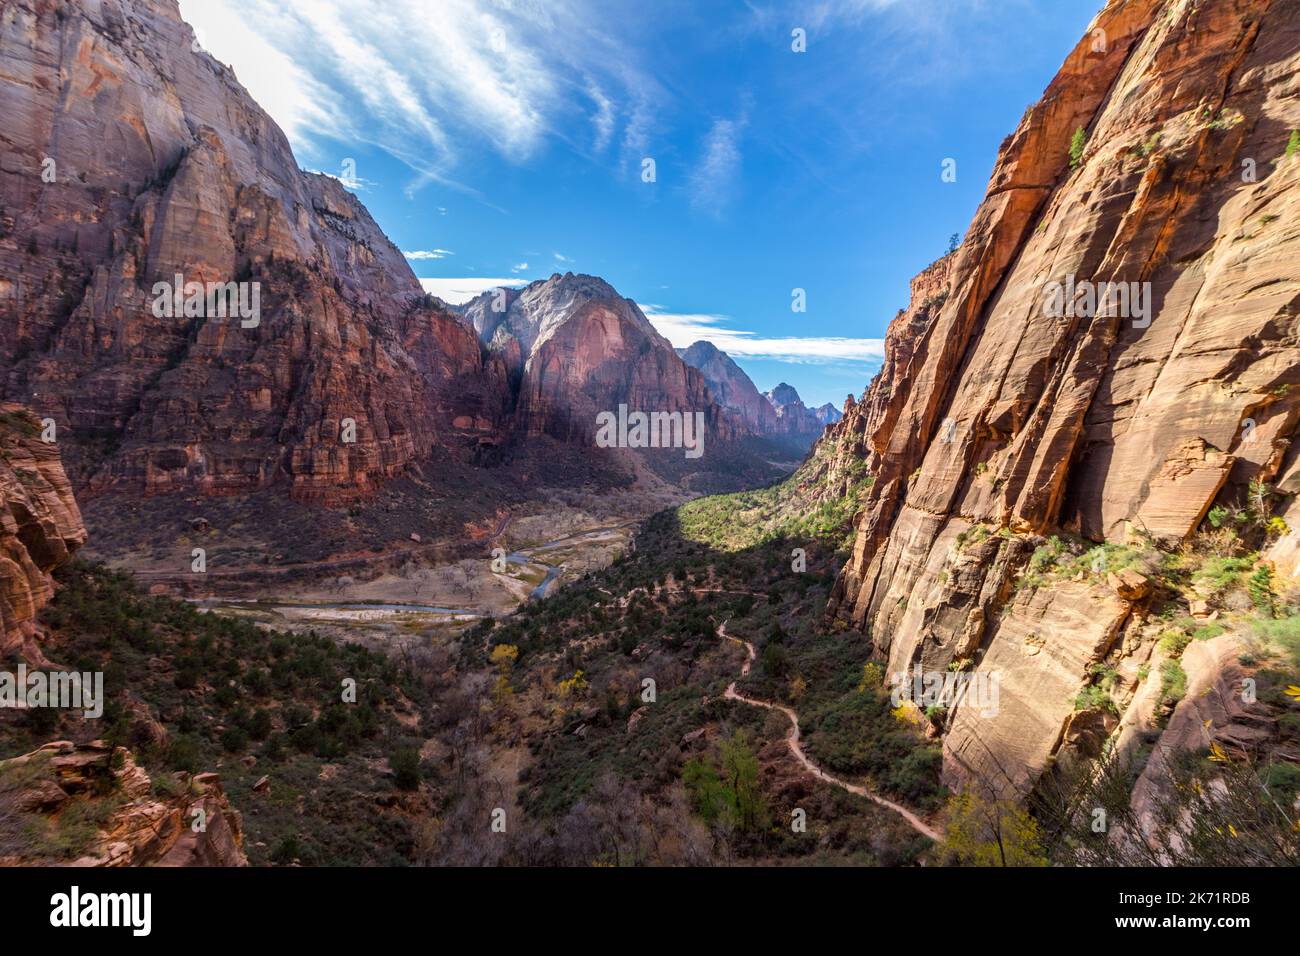 View of Zion Canyon from a winding hiking trail high above the canyon on a sunny November day in Zion National Park, Utah, USA Stock Photo